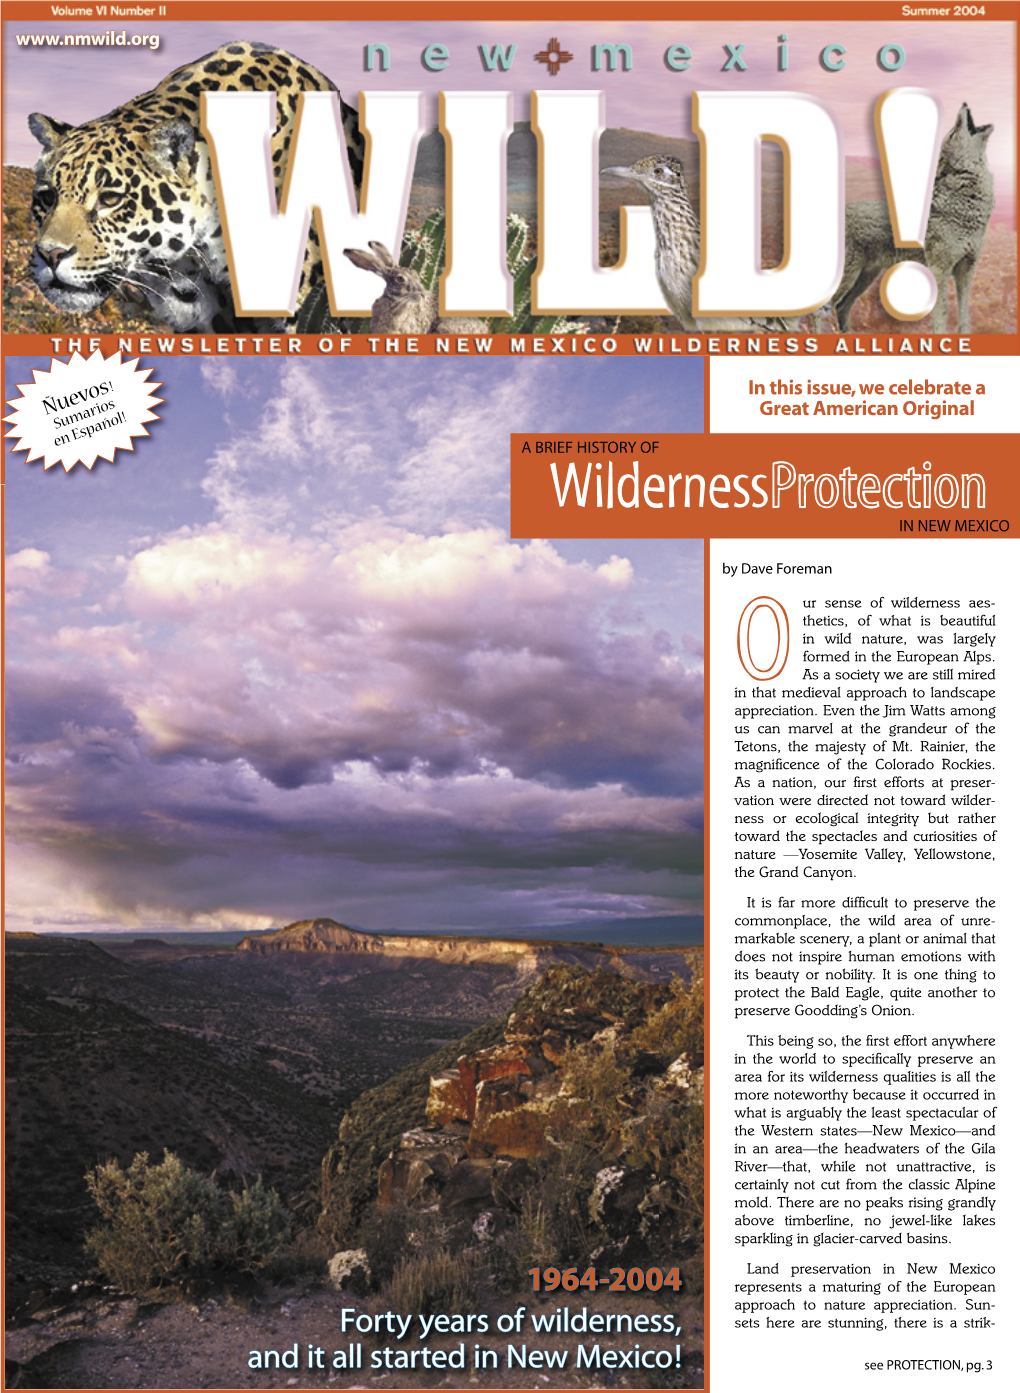 Wildernessprotection in NEW MEXICO